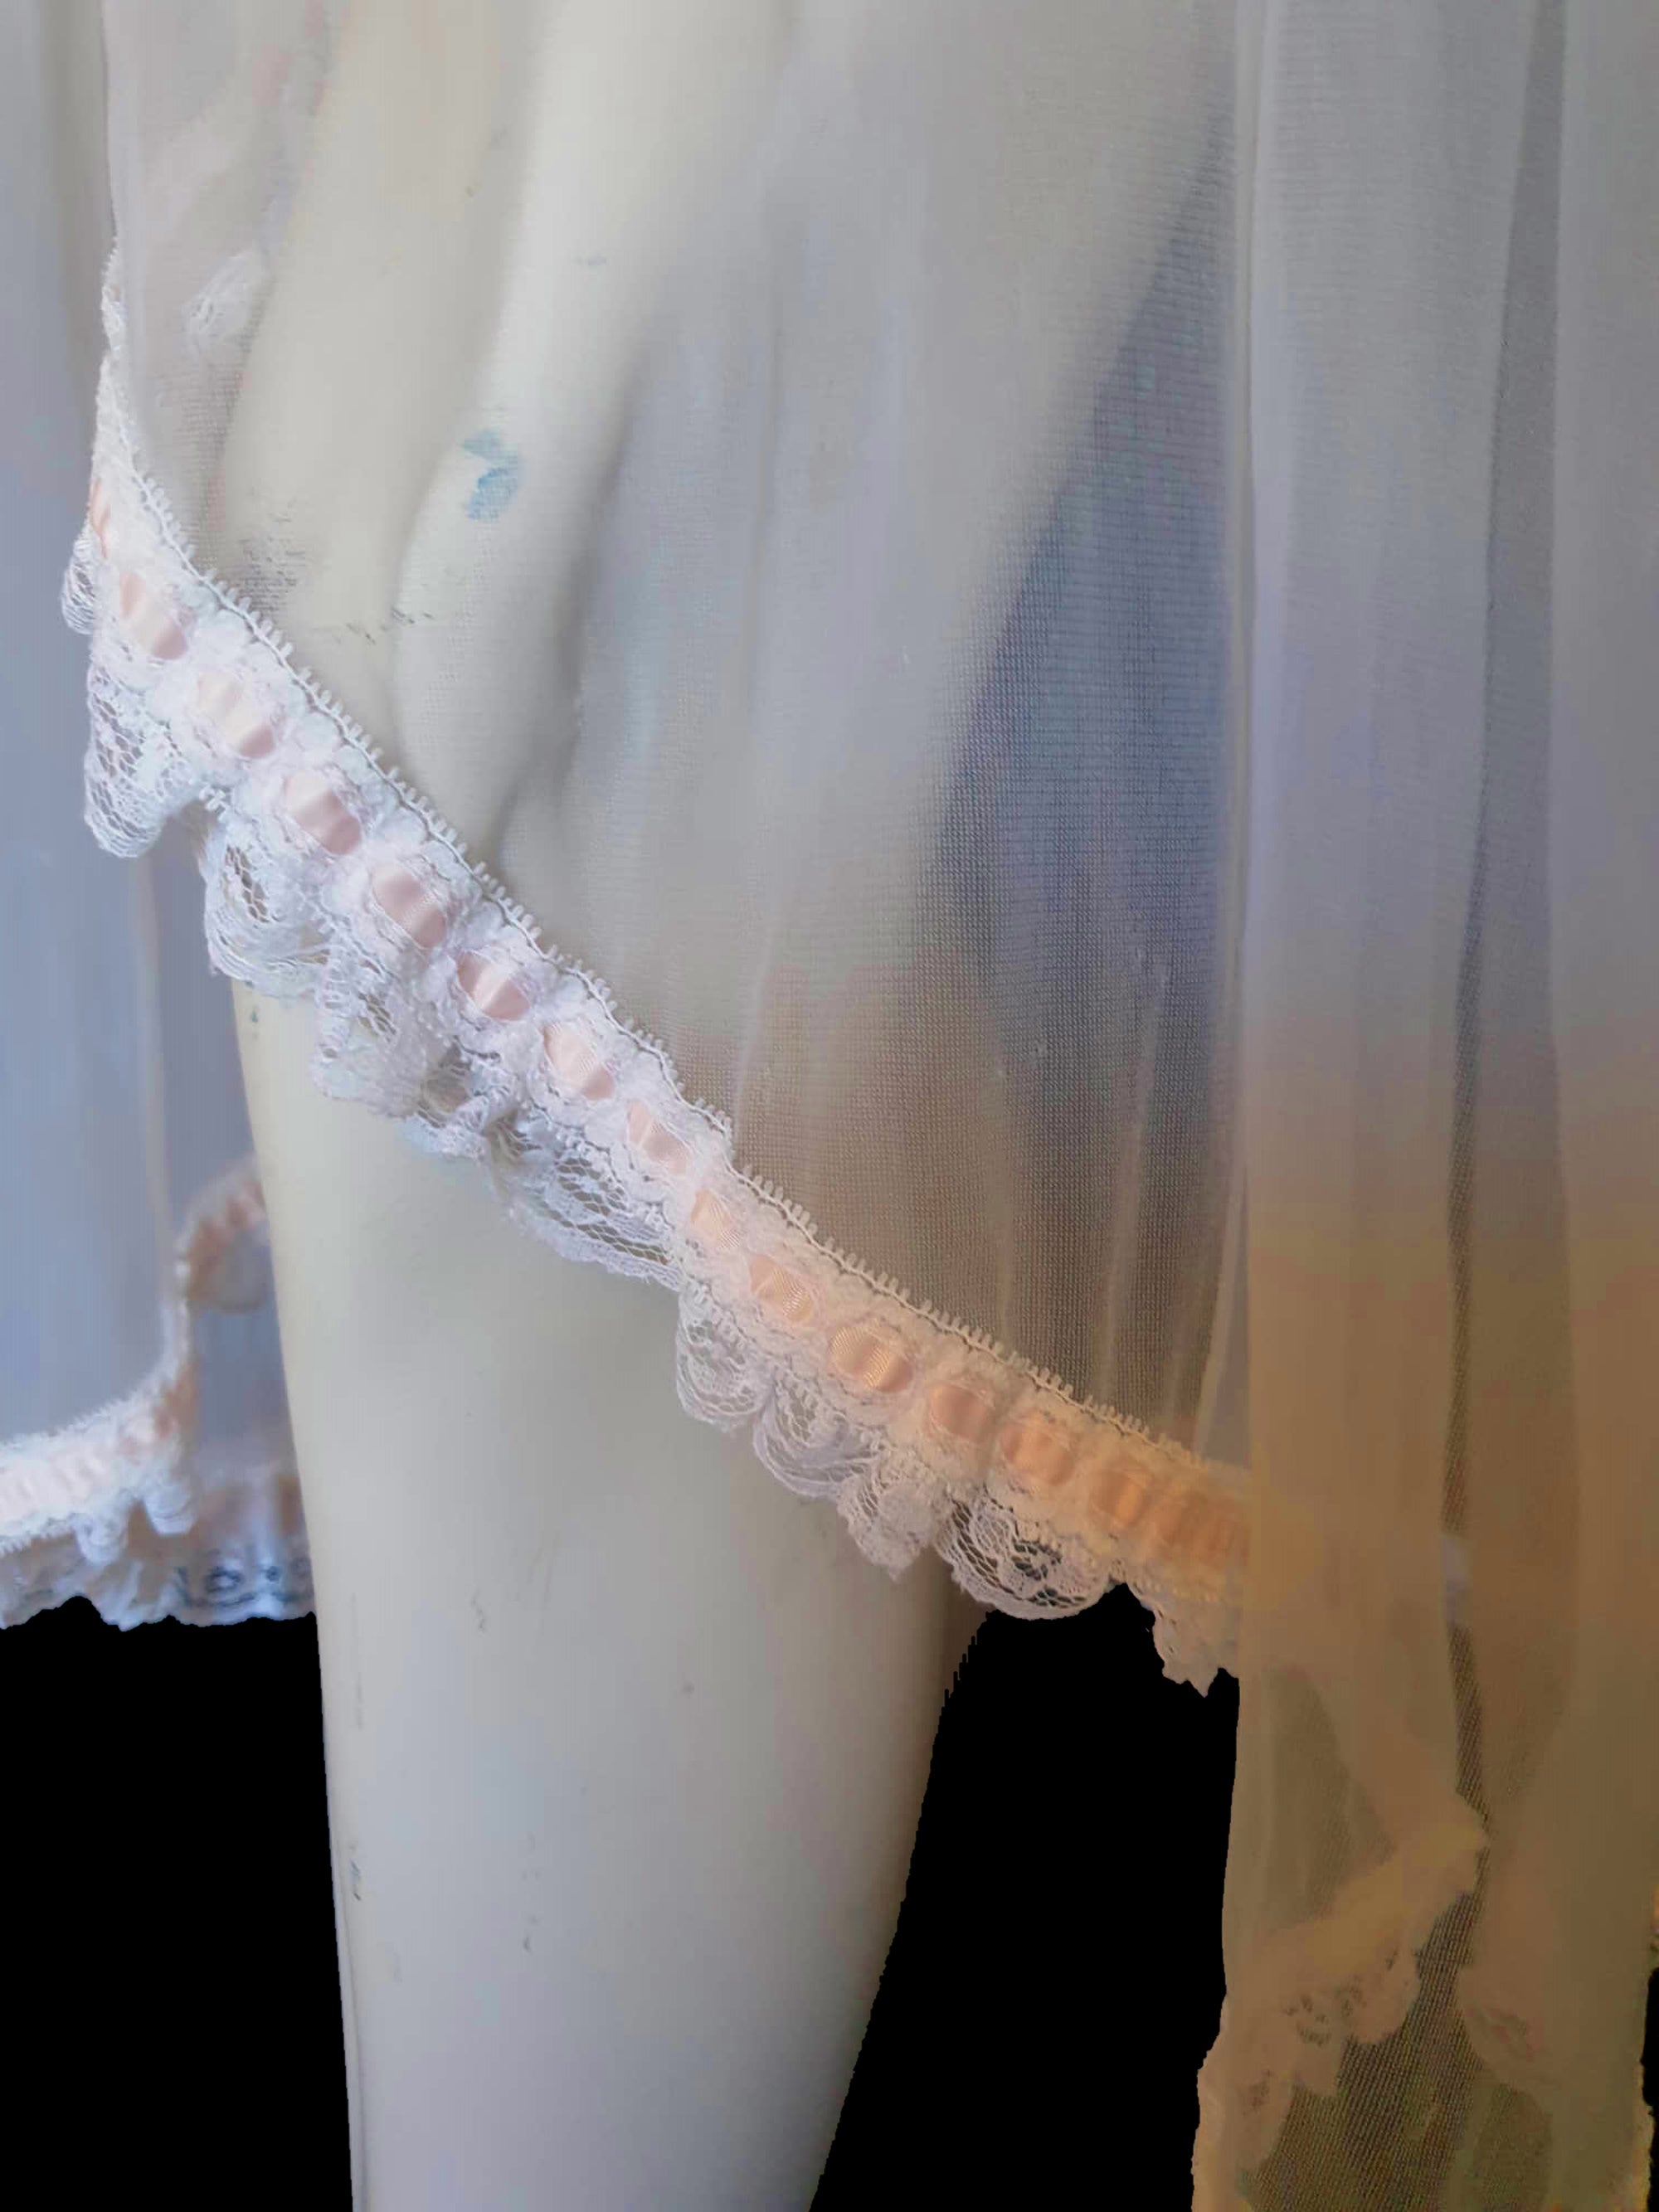 Vintage sheer white nylon negligee with pink ribbon and rosettes by Tosca or Delicates